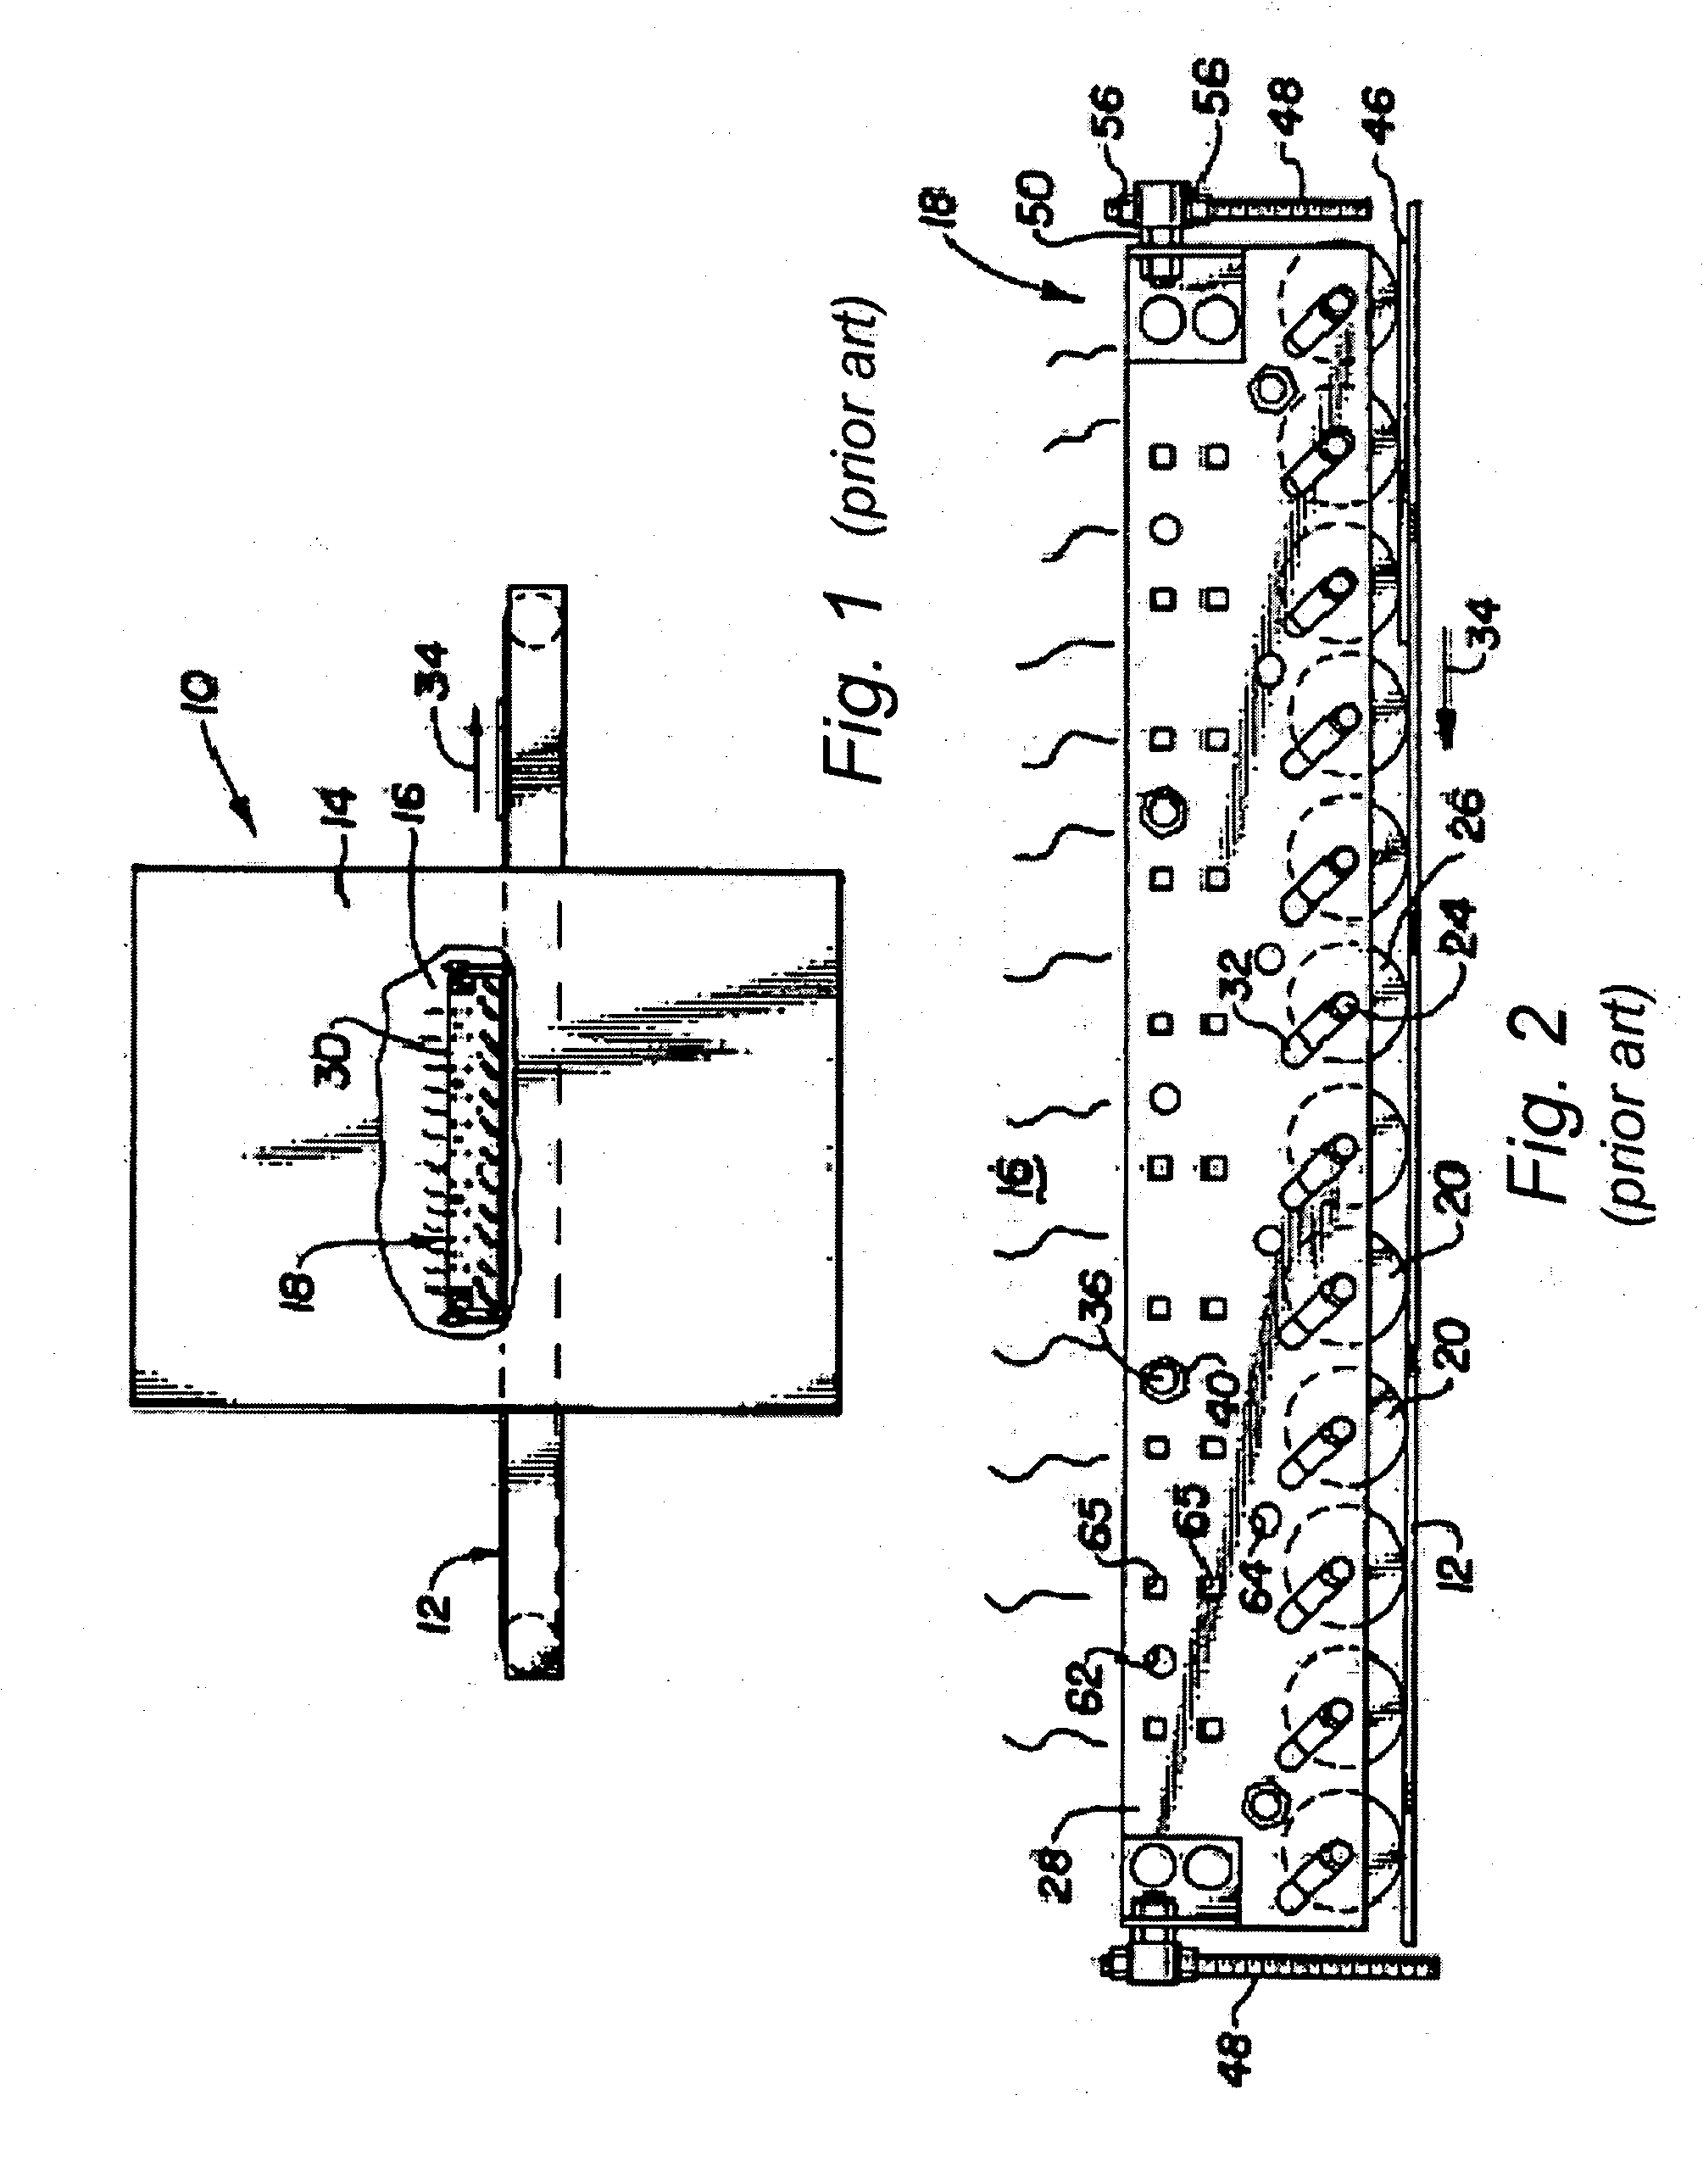 Apparatus for accommodating greater height variance of articles in shrink packaging machine